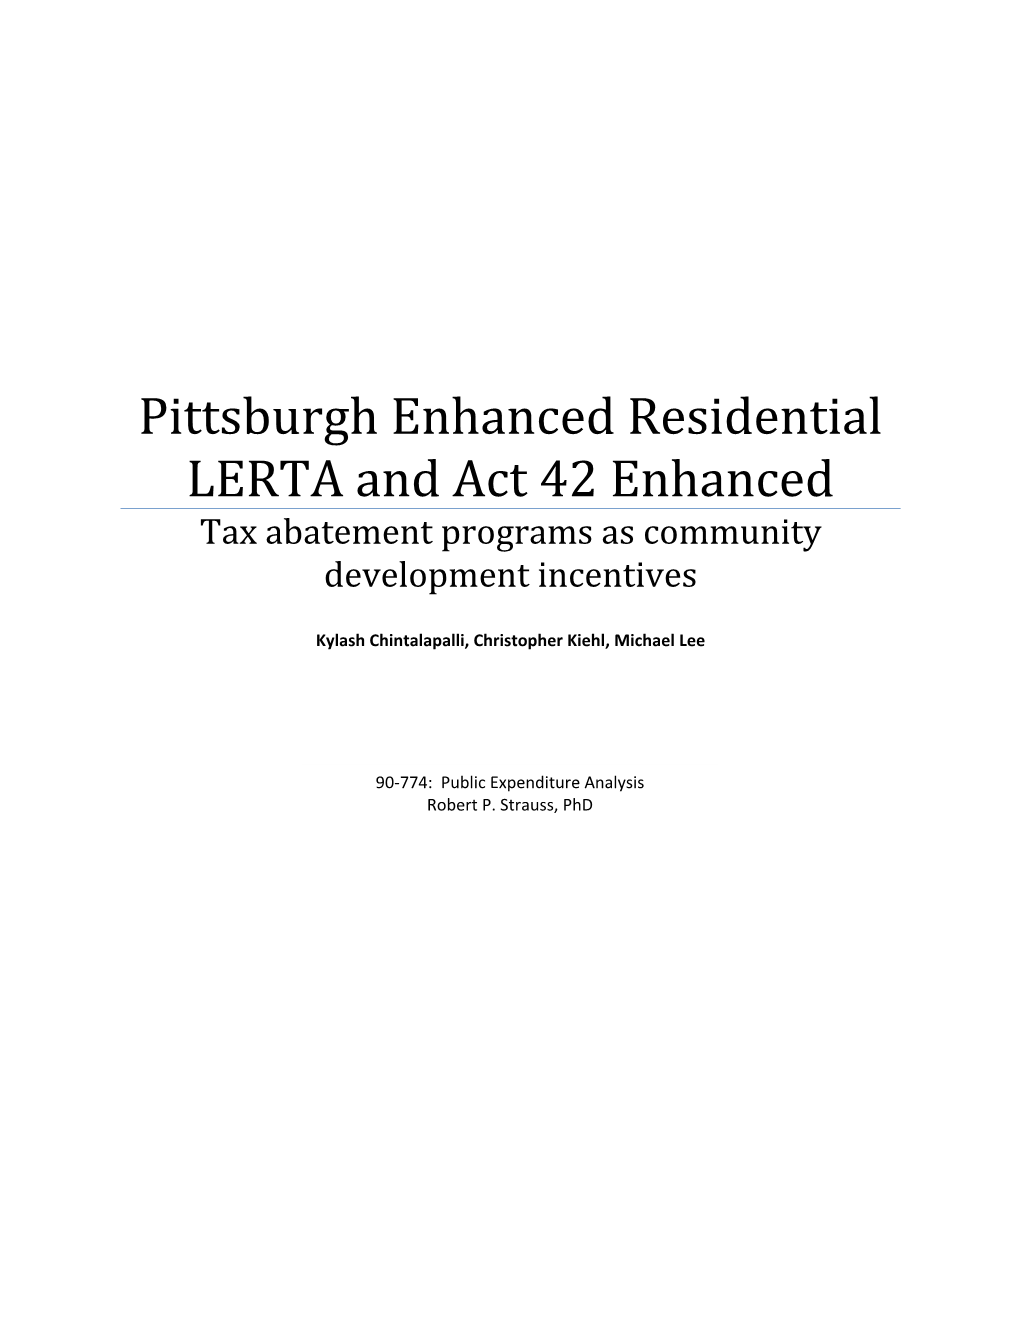 pittsburgh-enhanced-residential-lerta-and-act-42-enhanced-tax-abatement